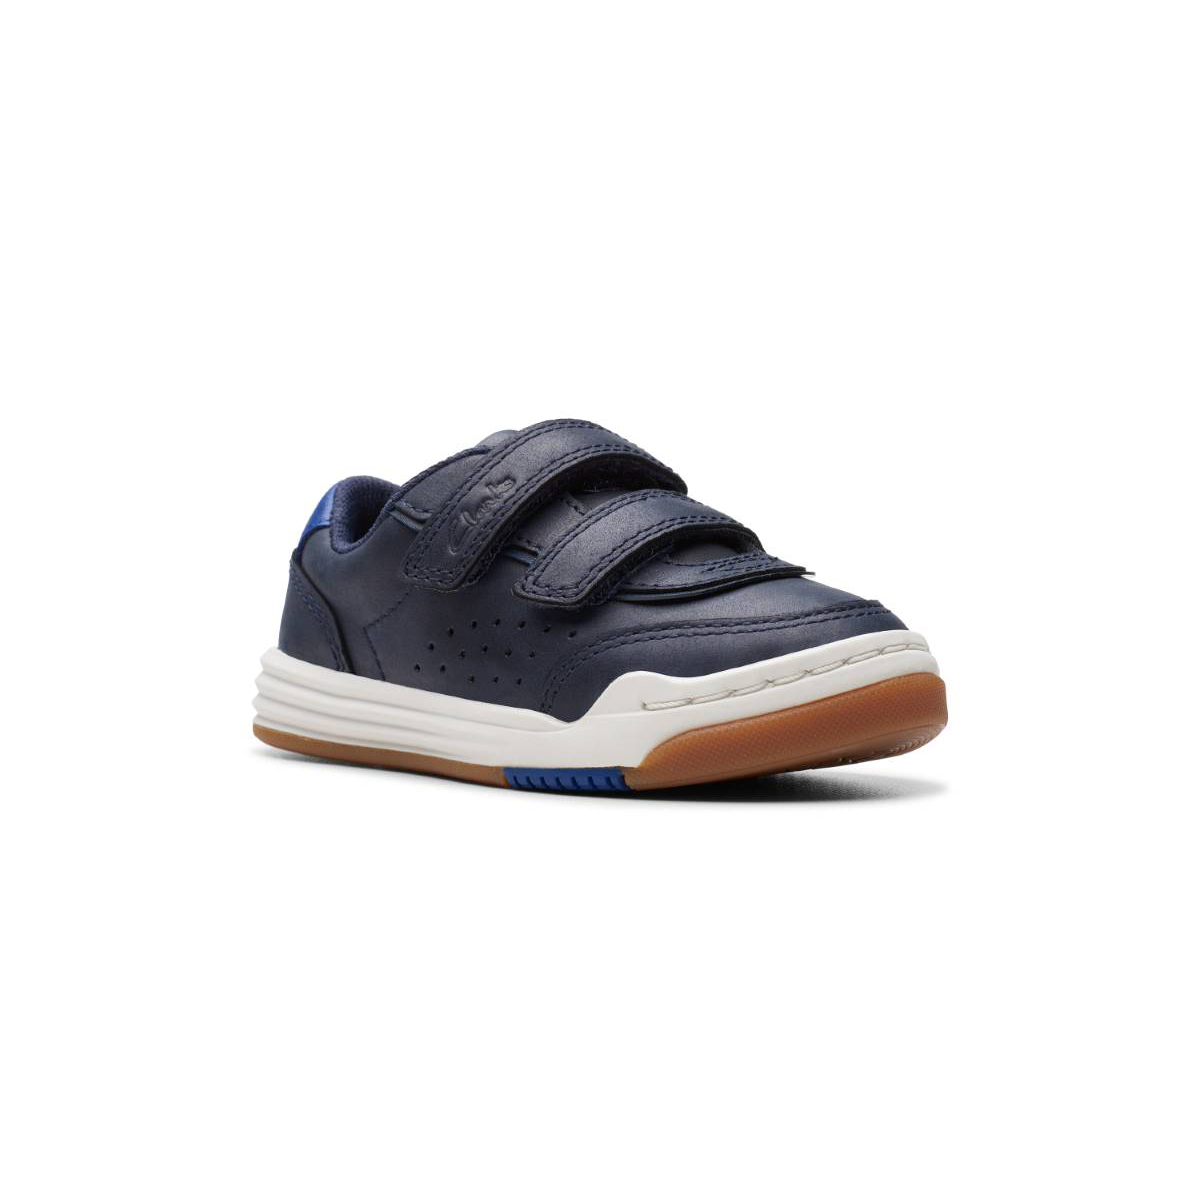 Clarks Urban Solo T Navy Leather Kids Boys Toddler Shoes 7666-46F in a Plain Leather in Size 5.5